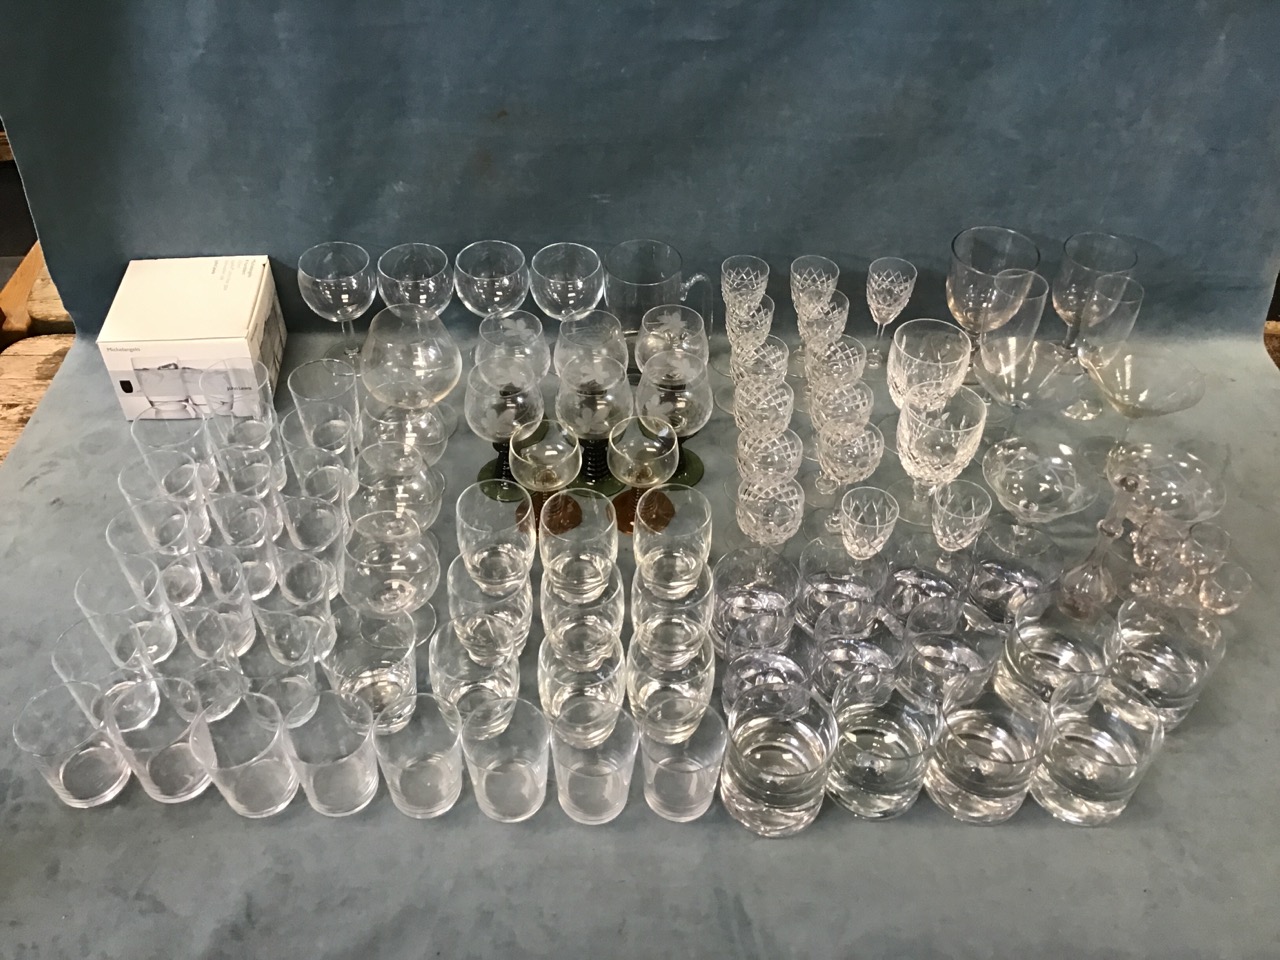 Miscellaneous glasses including sets of Edinburgh cut crystal, brandy balloons, tumblers, wine